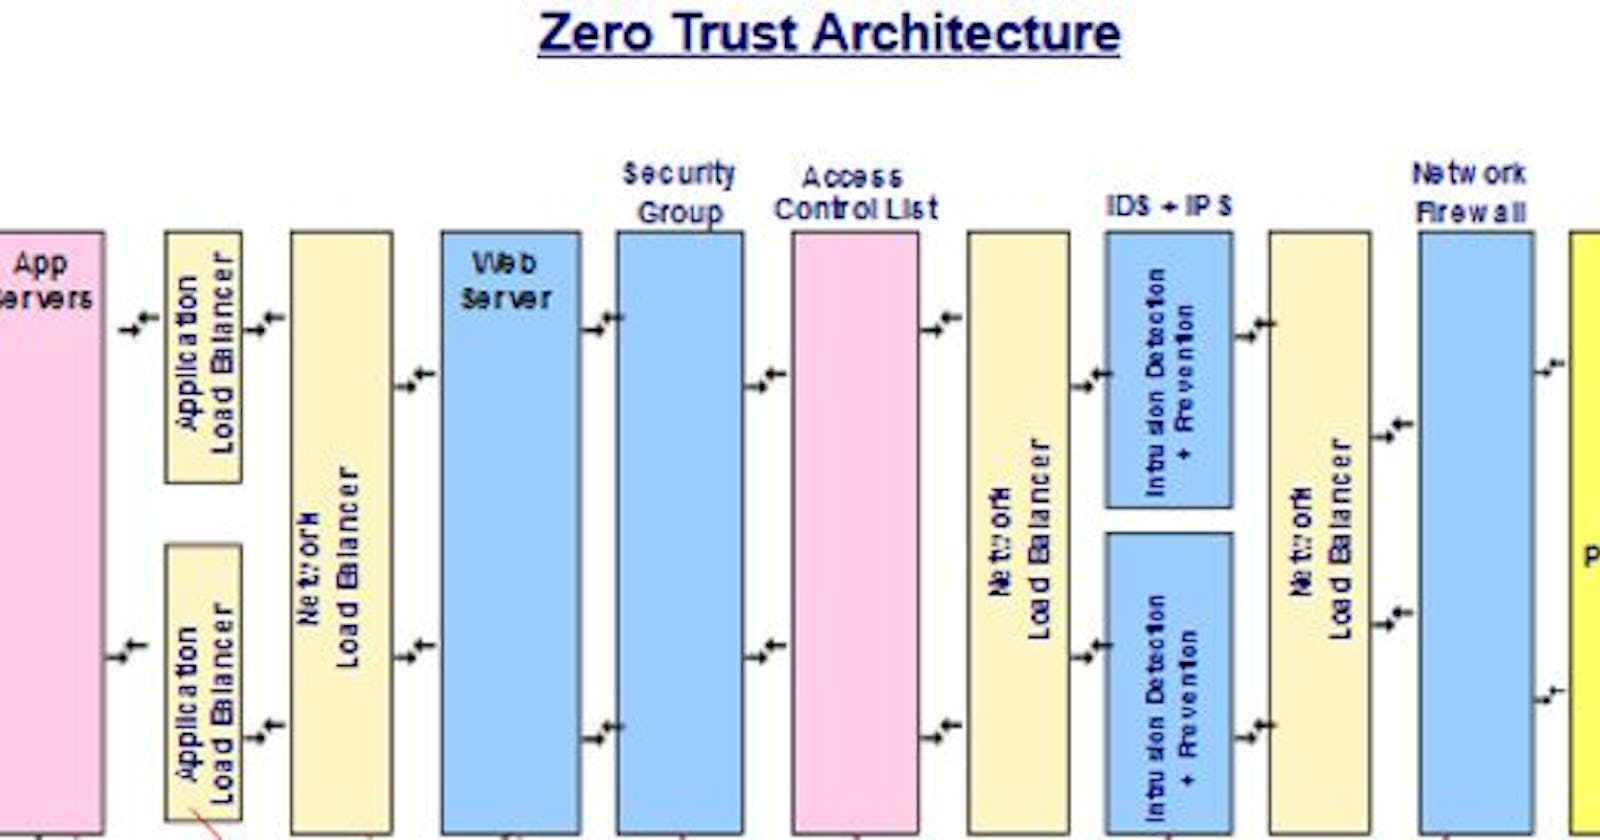 Methodologies for Designing Redundant and Resilient ZeroTRUST Security Architectures using the Mitre Attack Framework